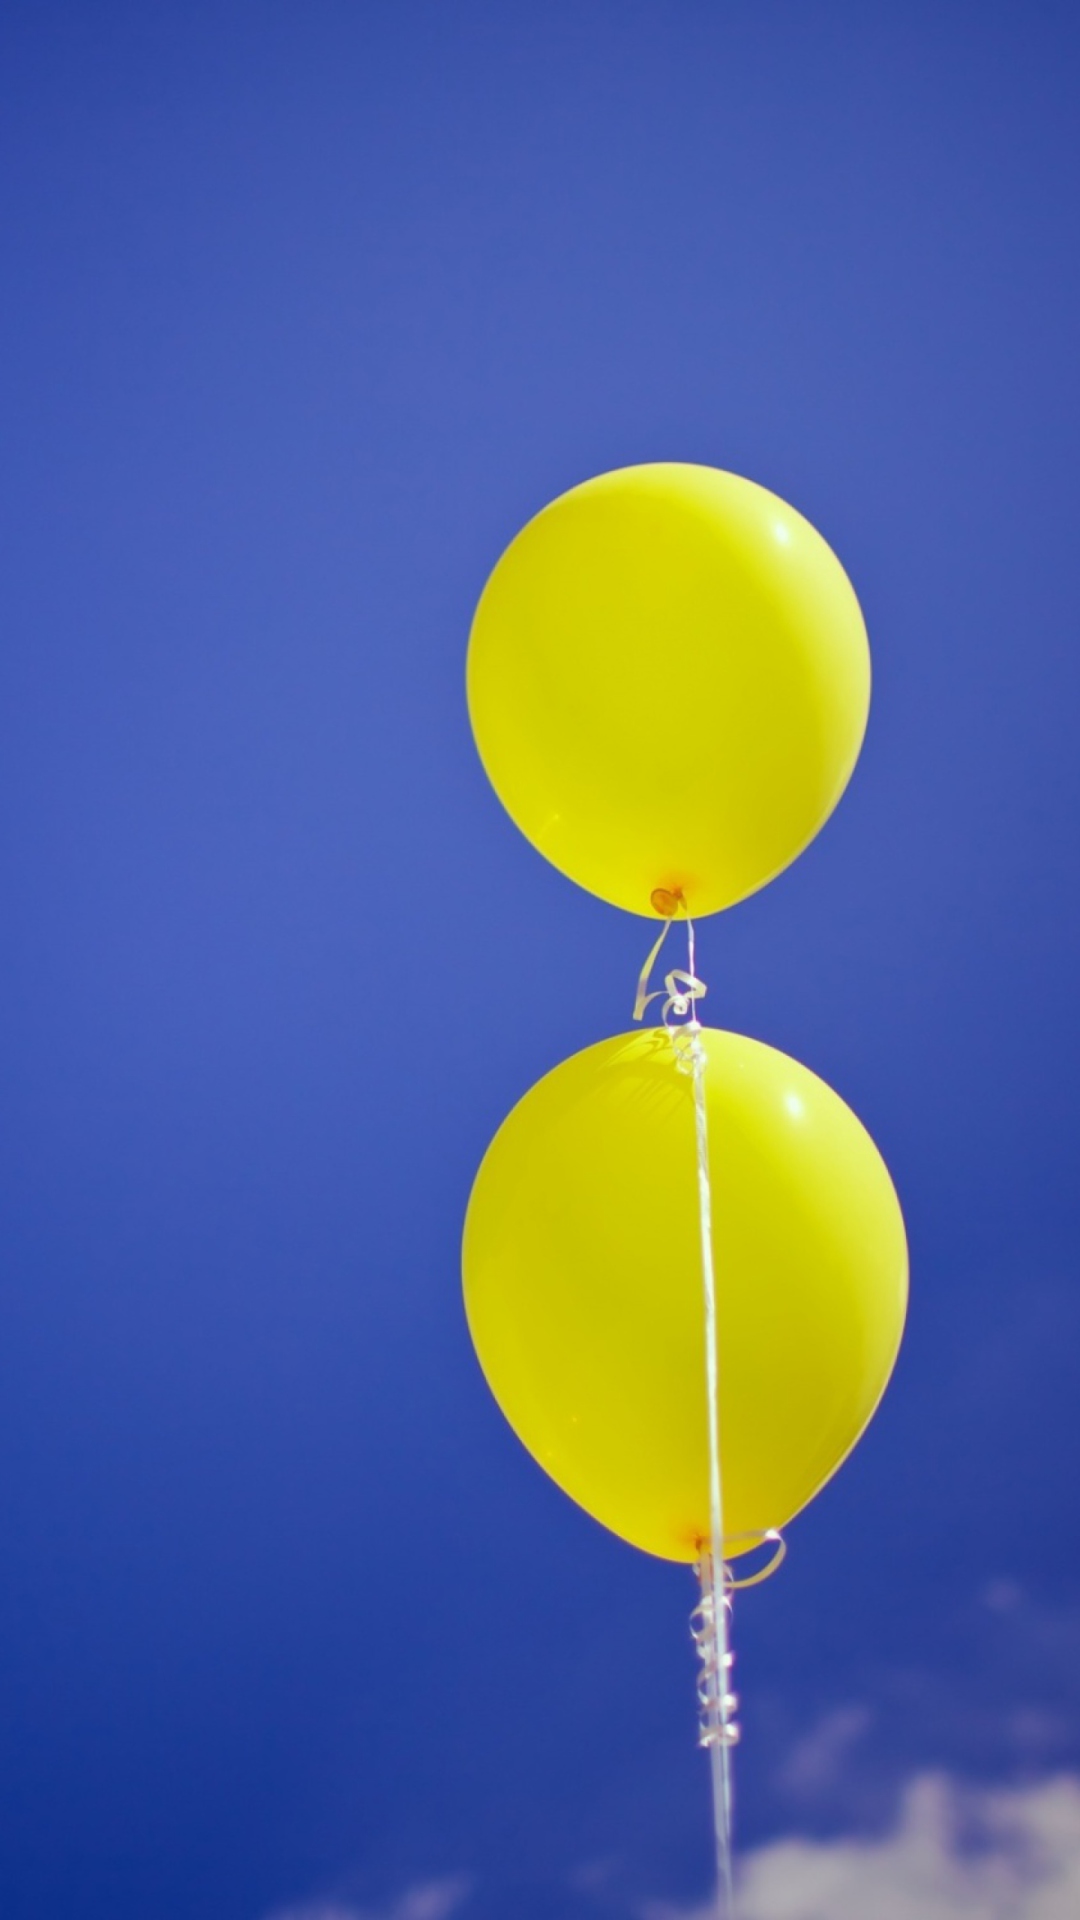 Yellow Balloons In The Blue Sky wallpaper 1080x1920